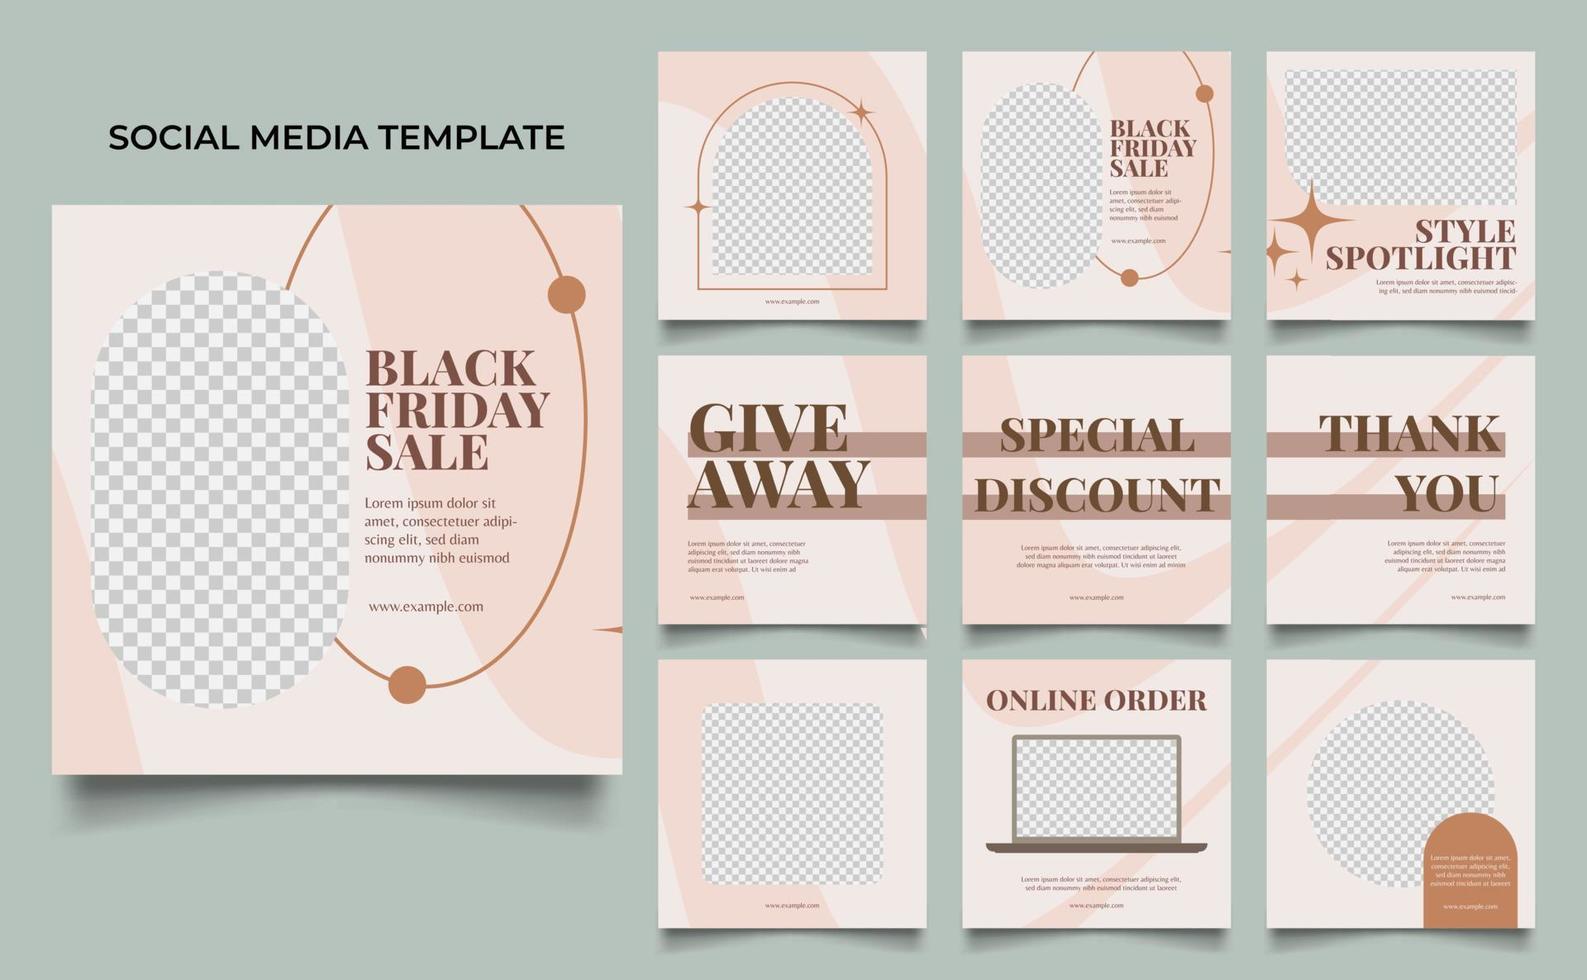 social media template banner fashion sale promotion in brown beige color. vector